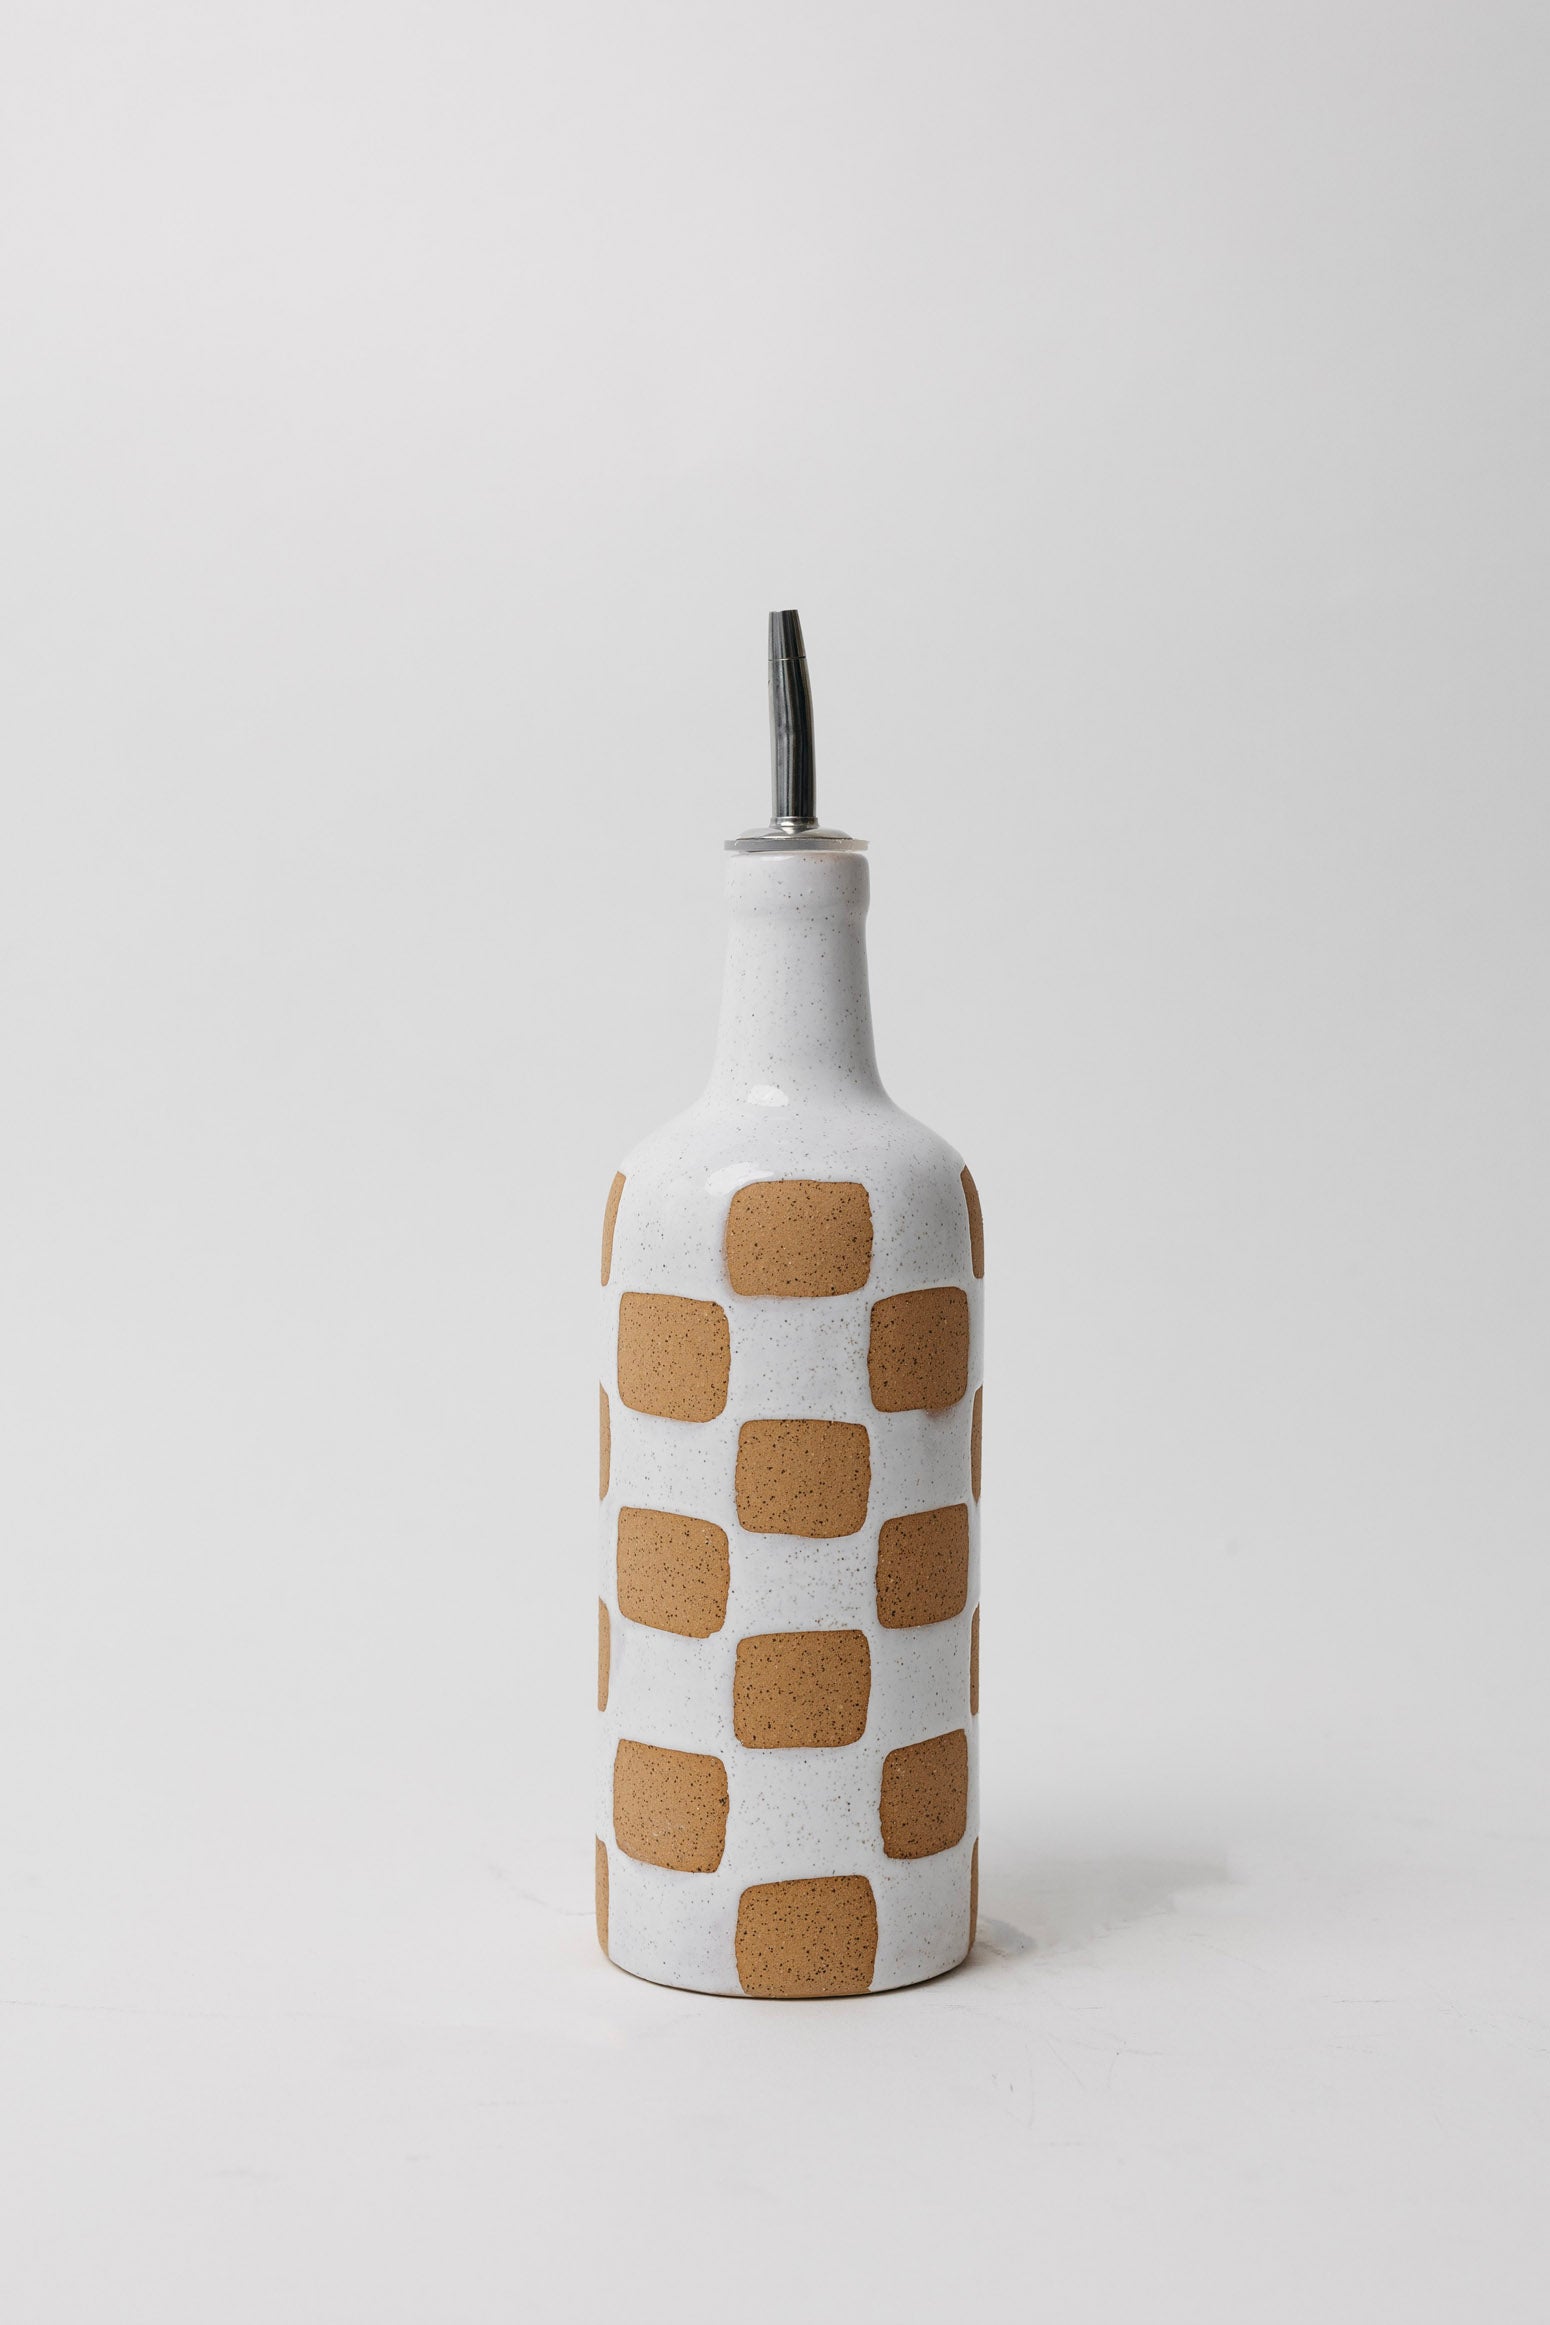 Ruca Checkered Oil Decanter - THELIFESTYLEDCO Shop